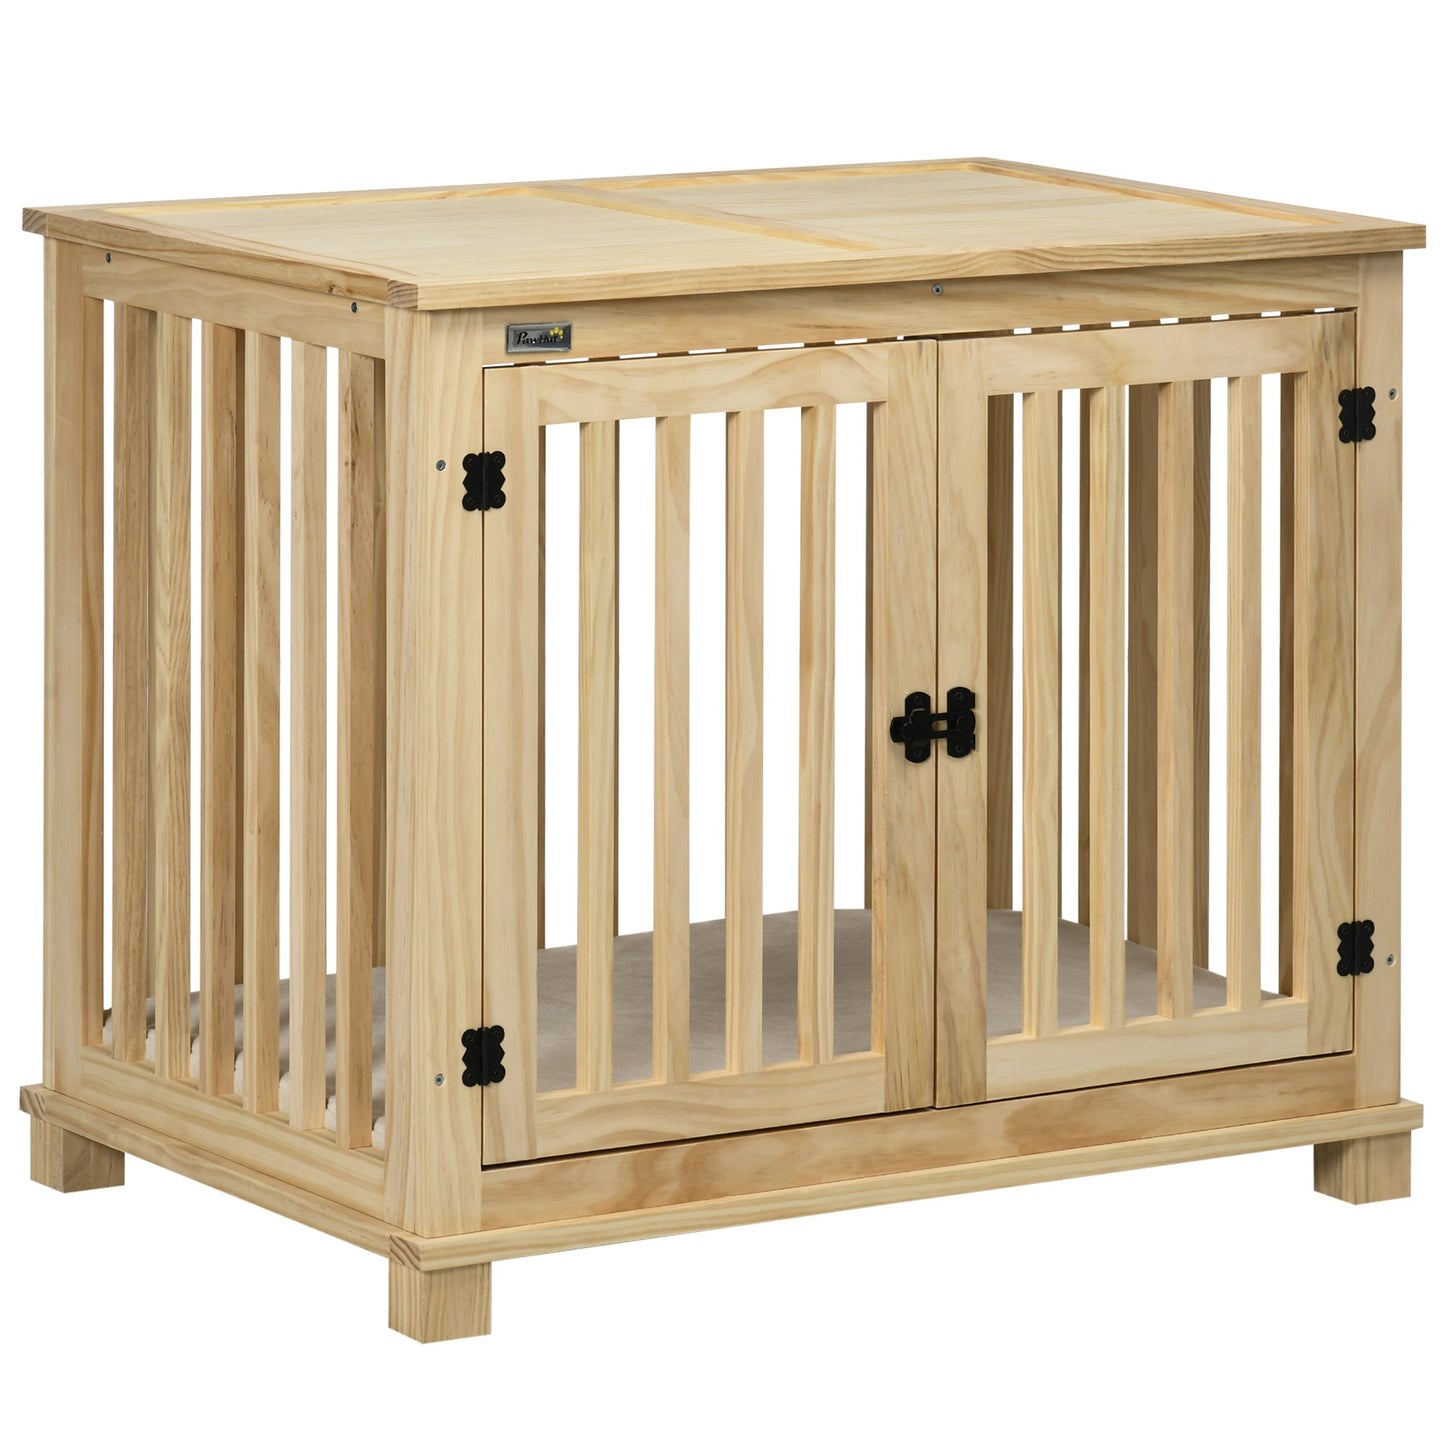 Pet Supplies-Wooden Dog Crate Furniture with Soft Cushion, Dog Crate End Table with Double Doors, Indoor Pet Crate for Small Medium Dogs, Natural - Outdoor Style Company